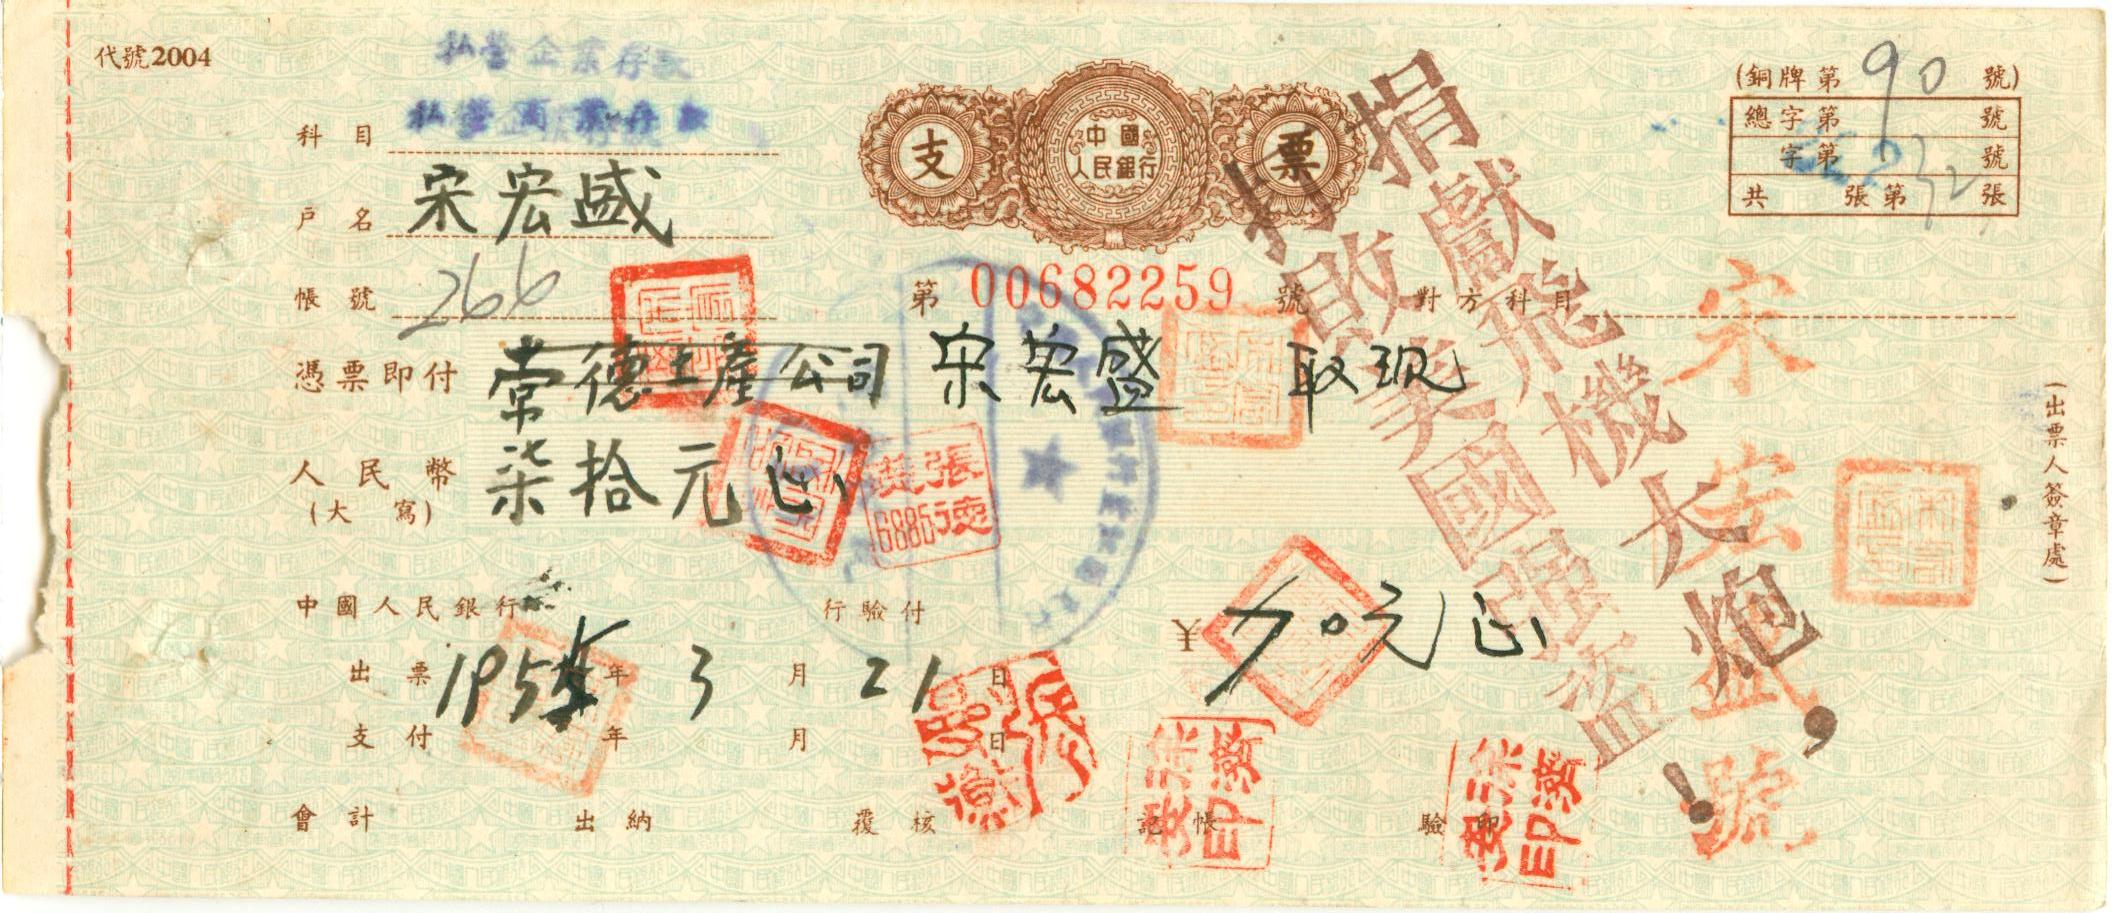 D1100, People's Bank of China, Check Cheque of 1955, With Korean War Slogan